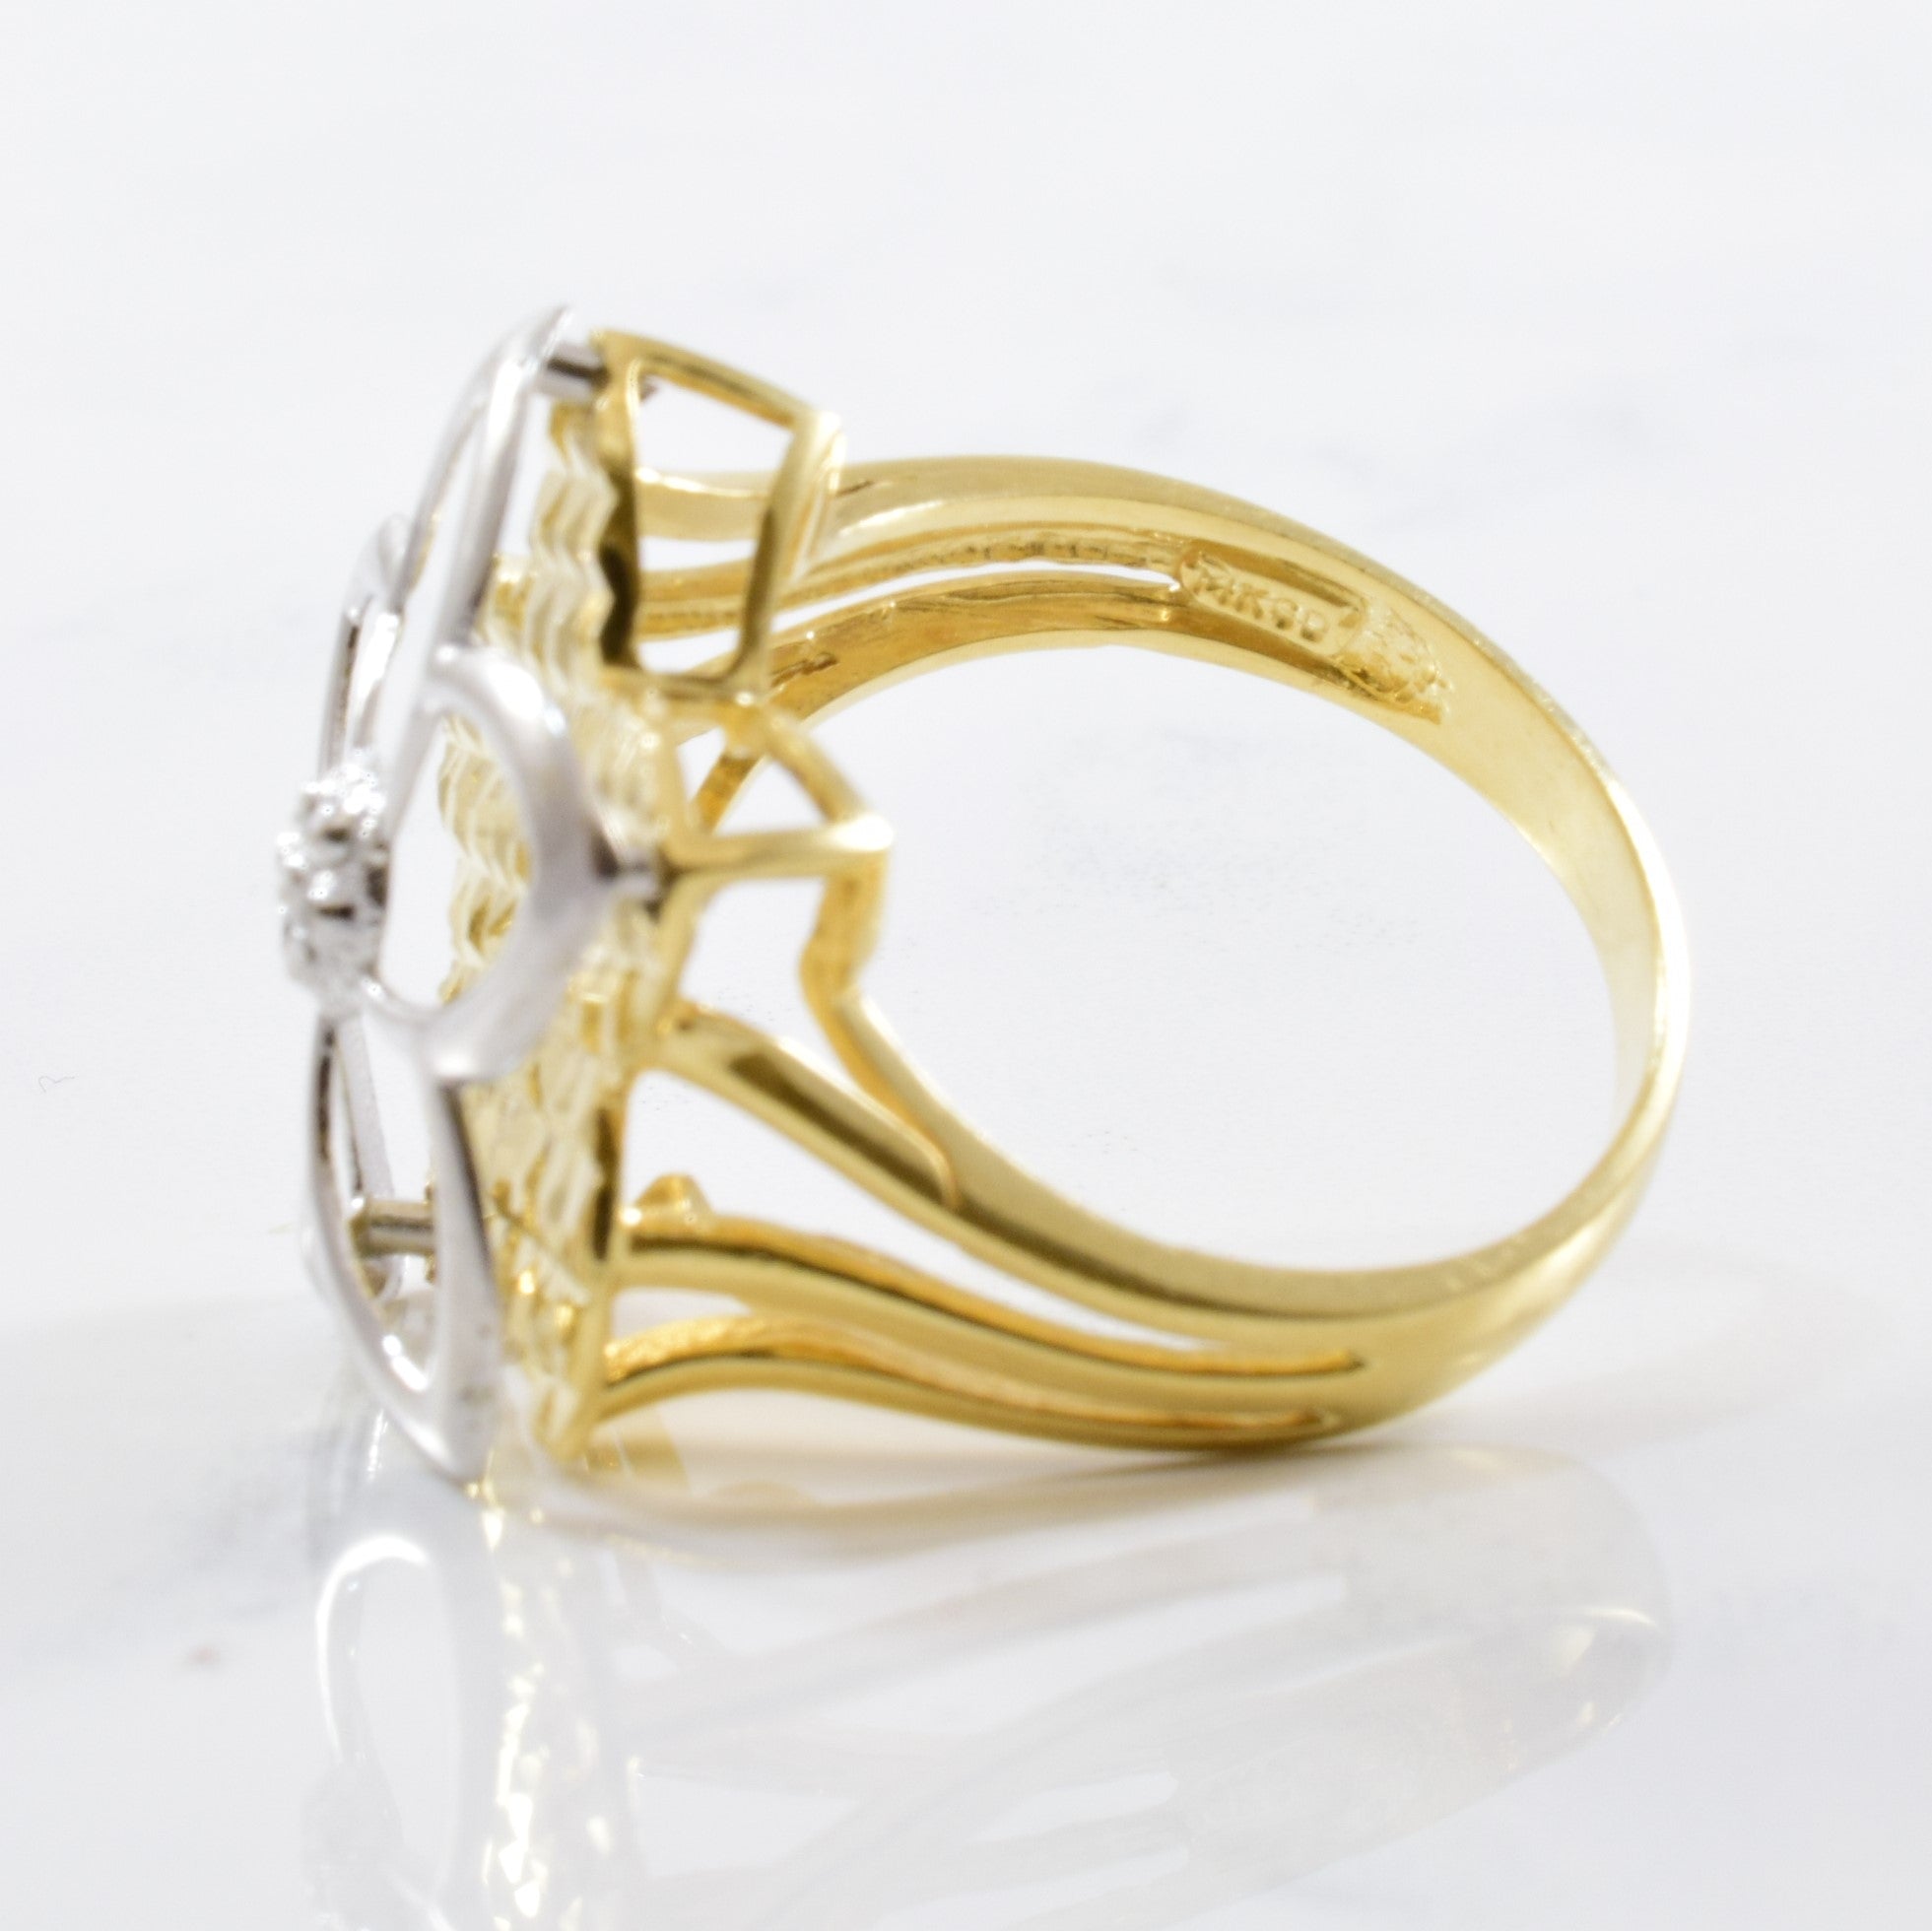 Two Tone Gold Flower Cocktail Ring | SZ 8.25 |